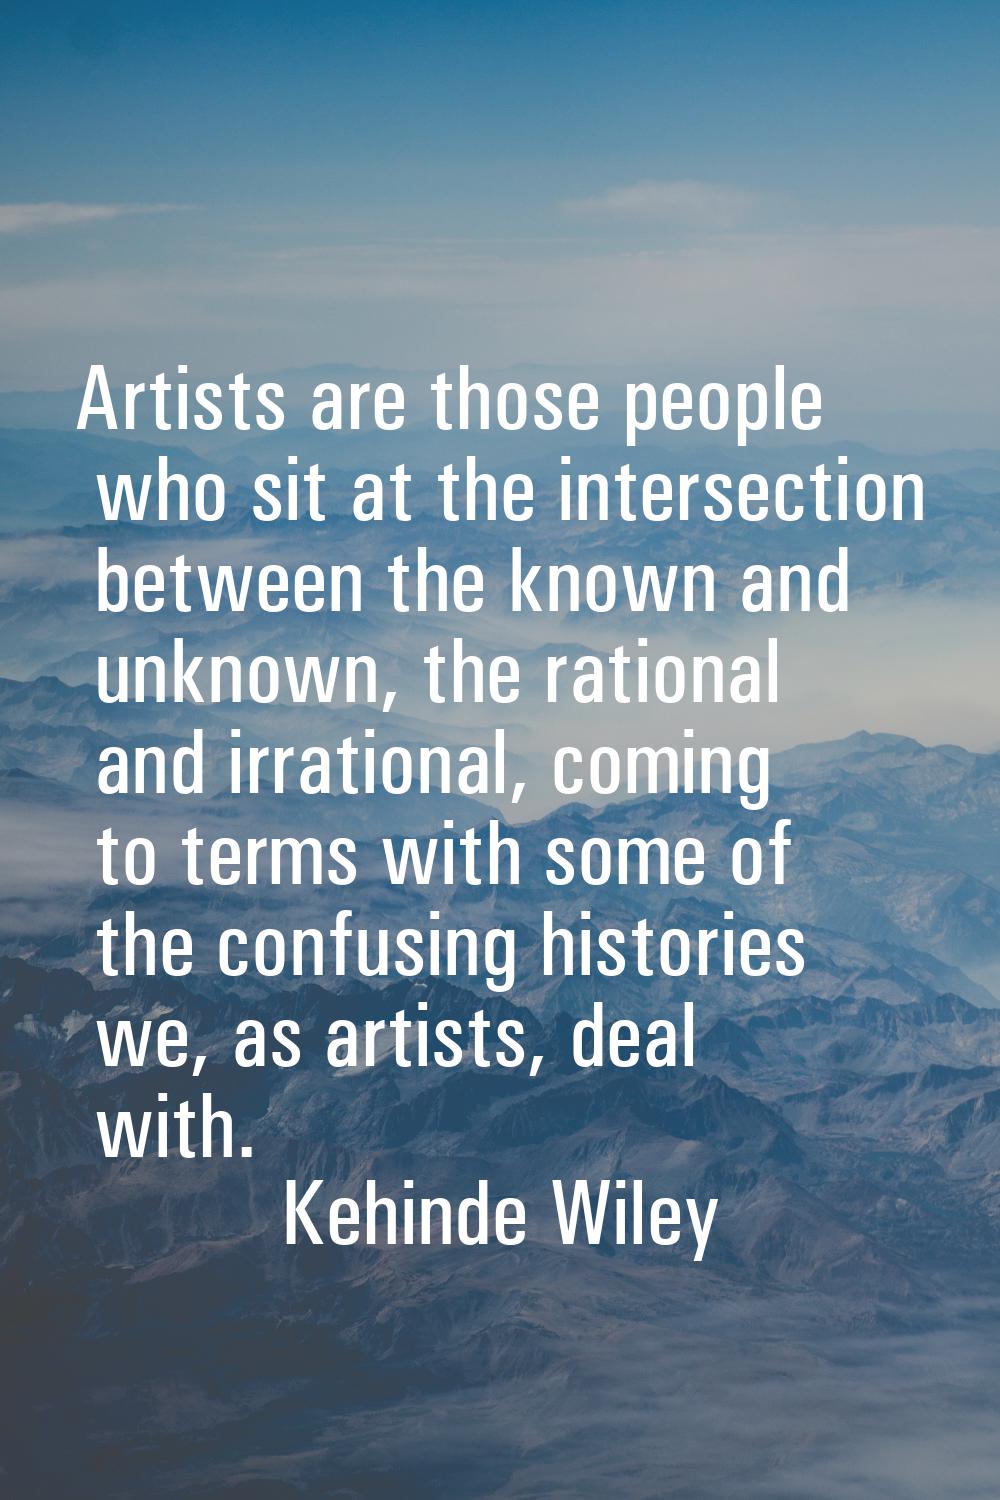 Artists are those people who sit at the intersection between the known and unknown, the rational an